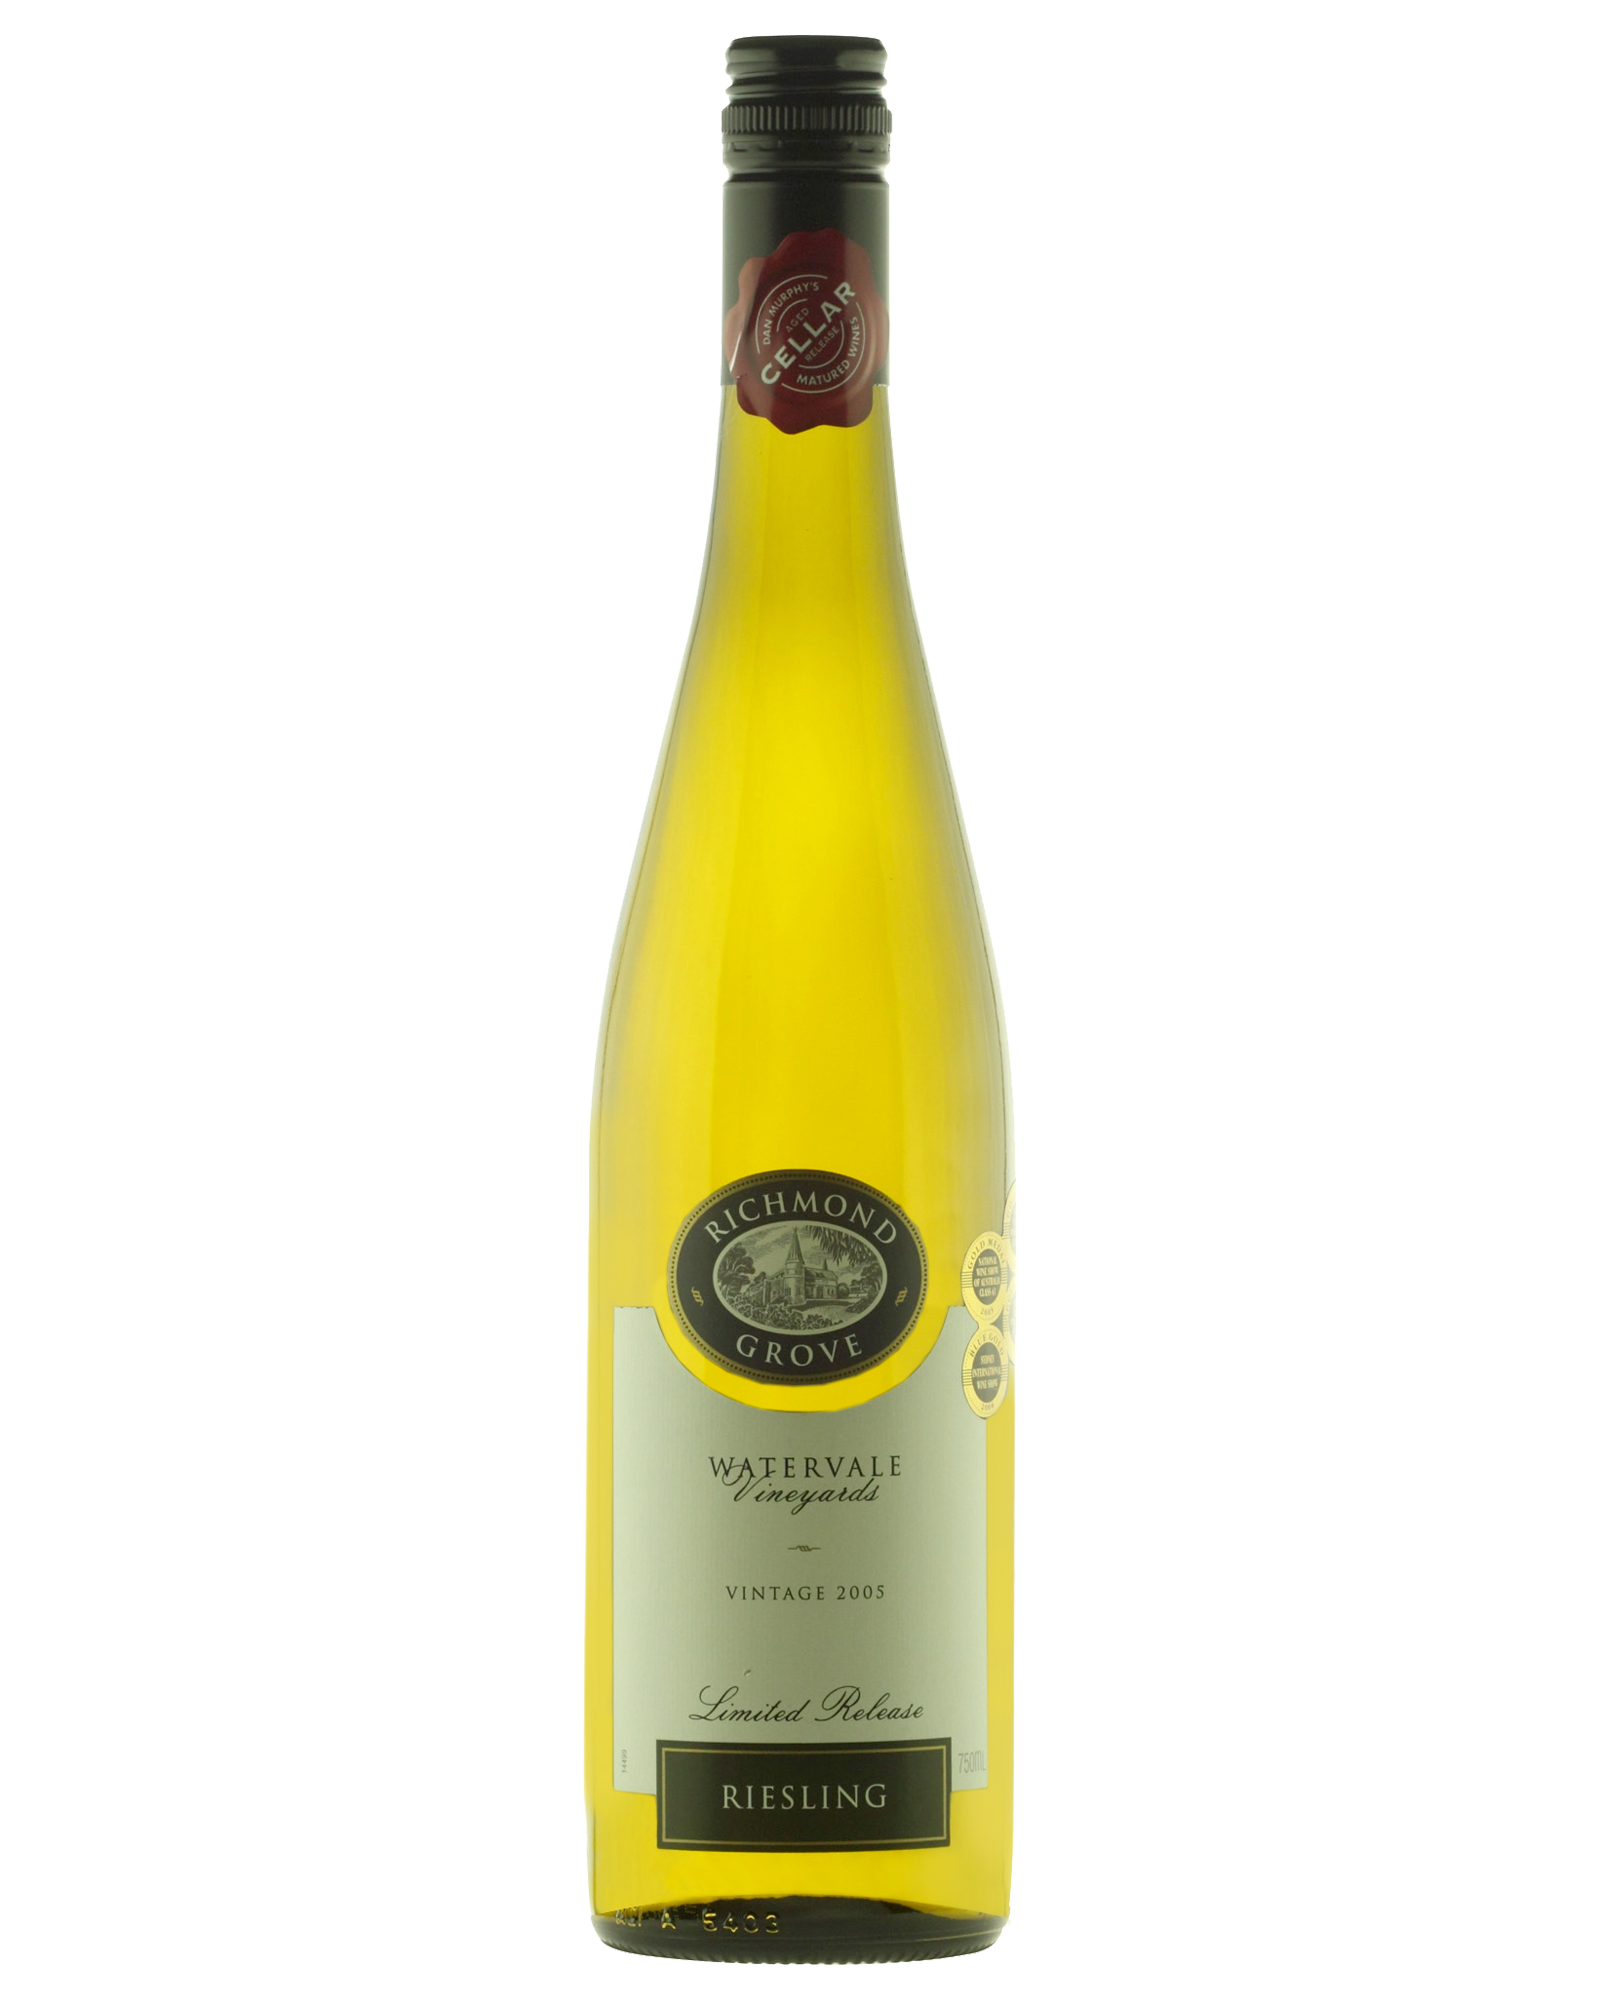 Richmond Grove Limited Release Riesling 2005